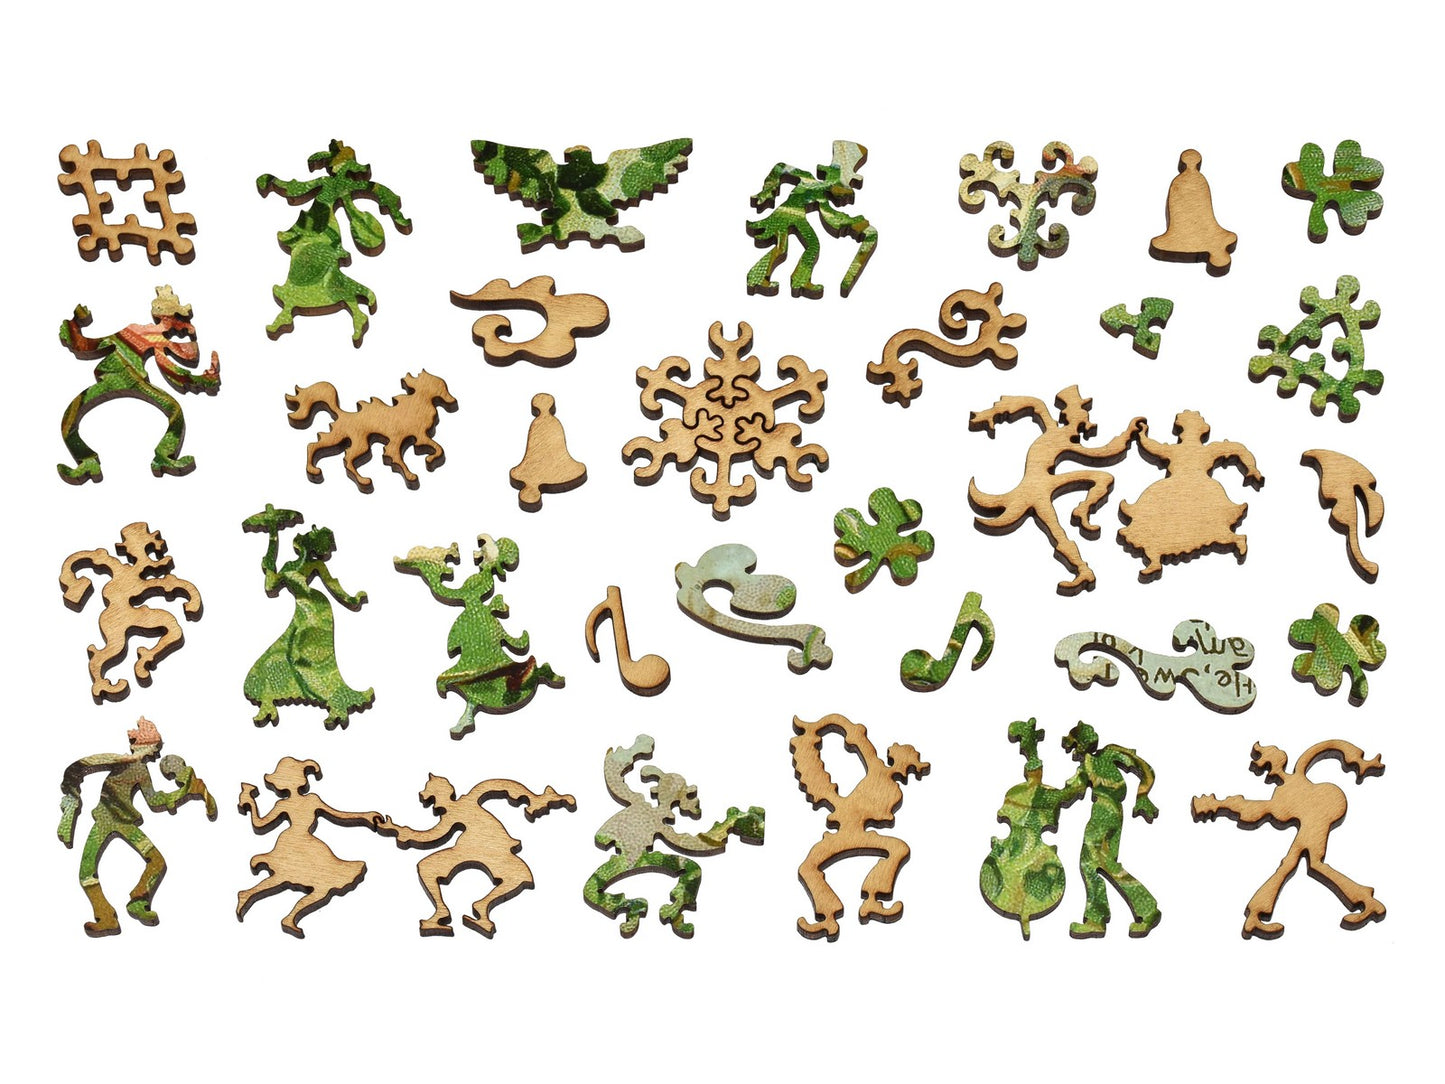 The whimsy pieces that can be found in the puzzle, Shamrock of Ireland.